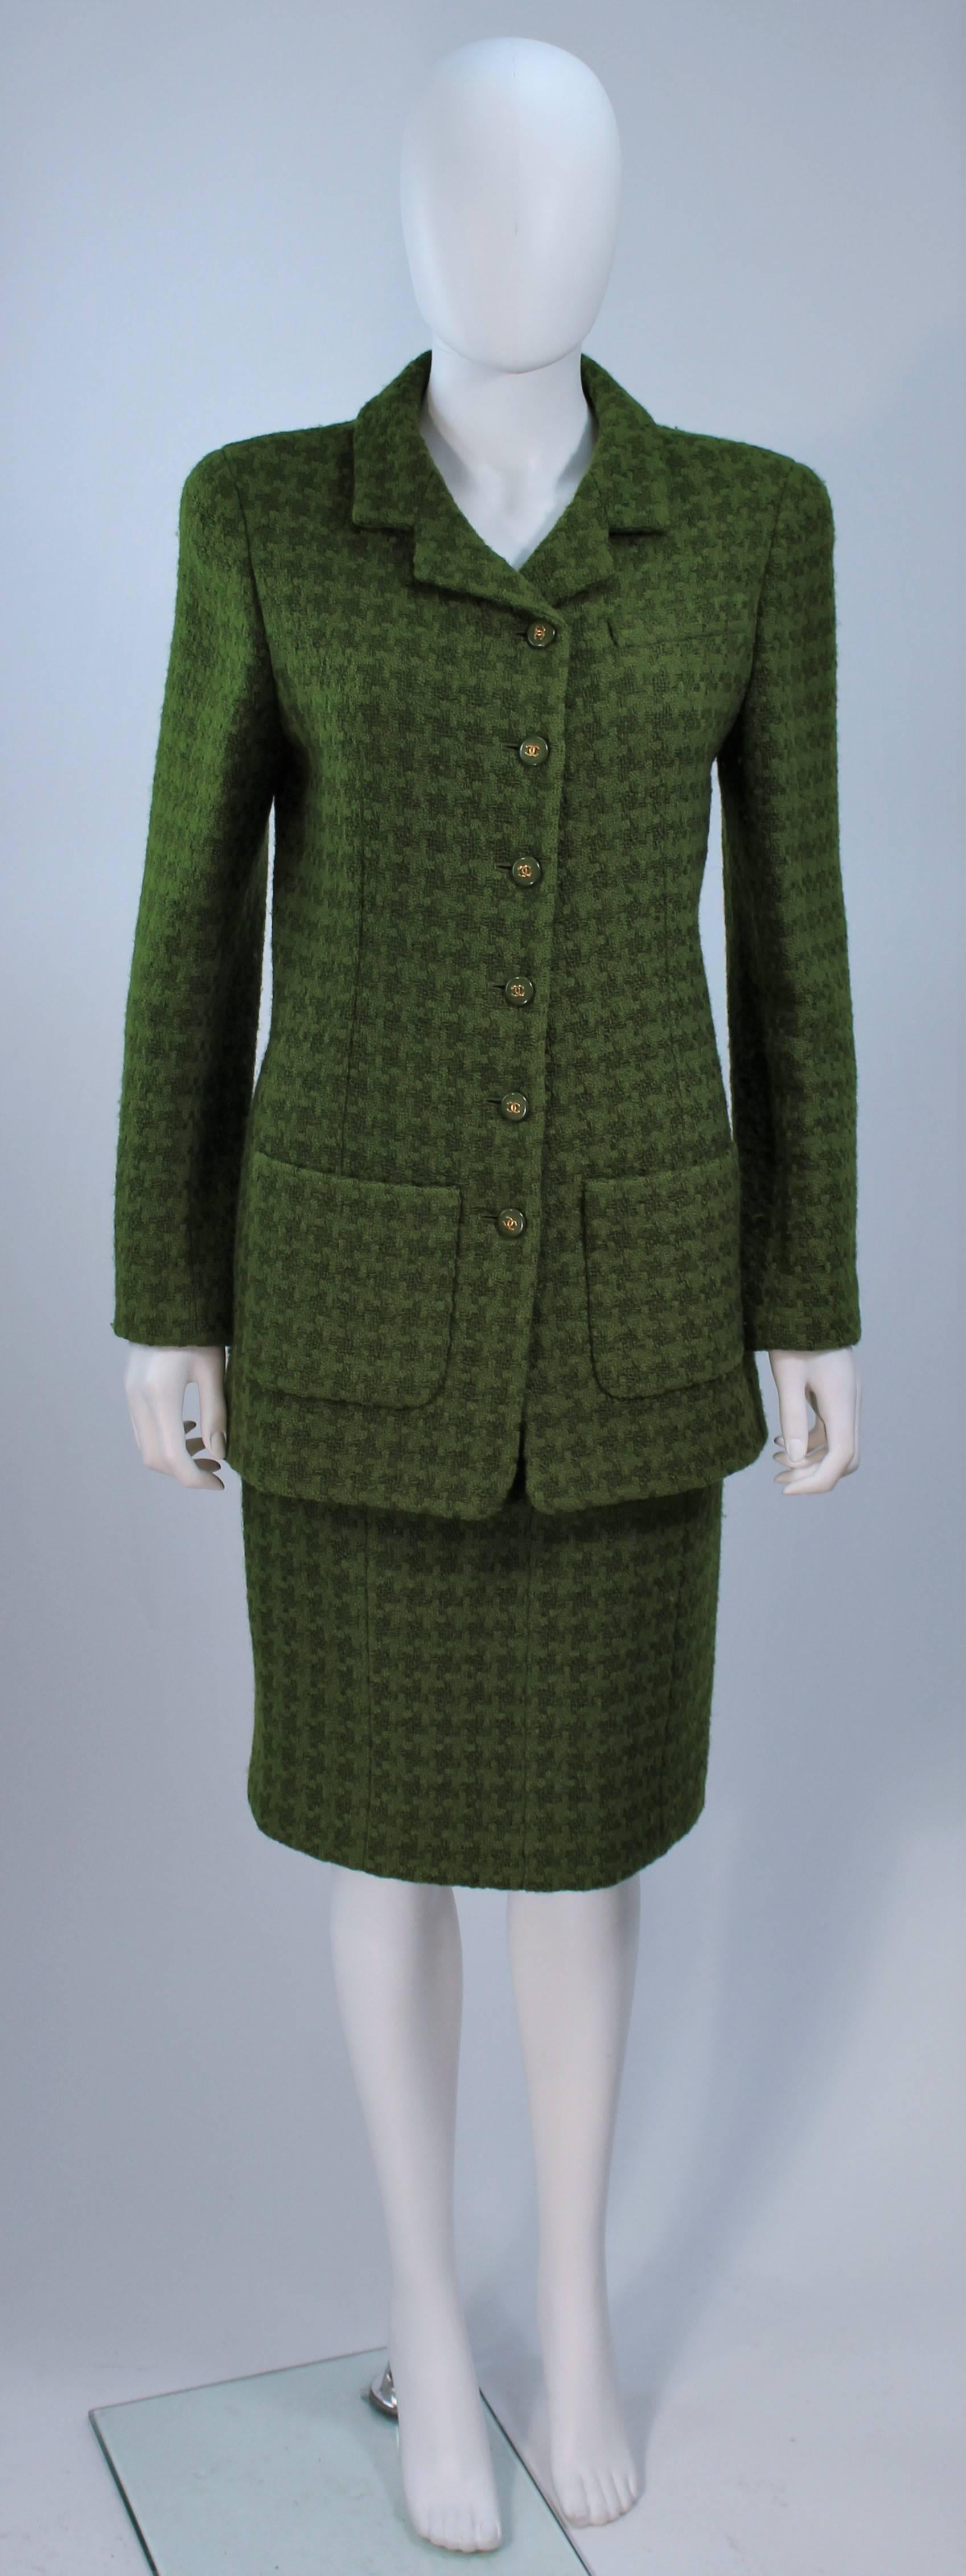  This Chanel  suit is composed of a green wool with a houndstooth pattern and silk lining. The coat features center front button closures, and the classic pencil style skirt features a zipper closure with hook and eye. In excellent vintage